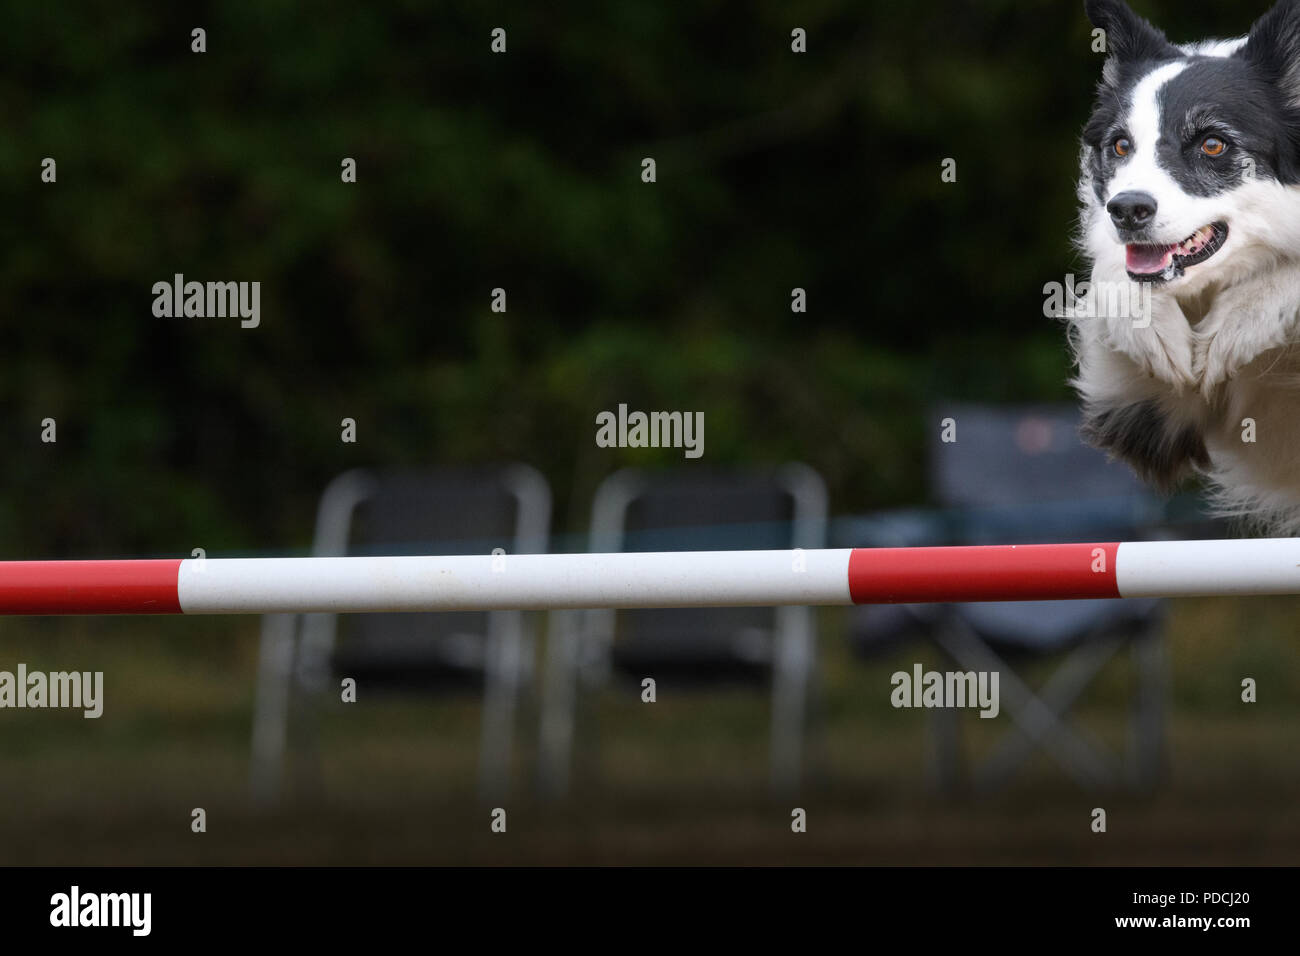 Rockingham Castle, Corby, England. 9th August 2018. With a look of keen concentration, a competing dog leaps a hurdle successfully at the Kennel Club's international dog agility competition in the Great Park of Rockingham castle, Corby, England, on 9th August 2018. Credit: Michael Foley/Alamy Live News Stock Photo